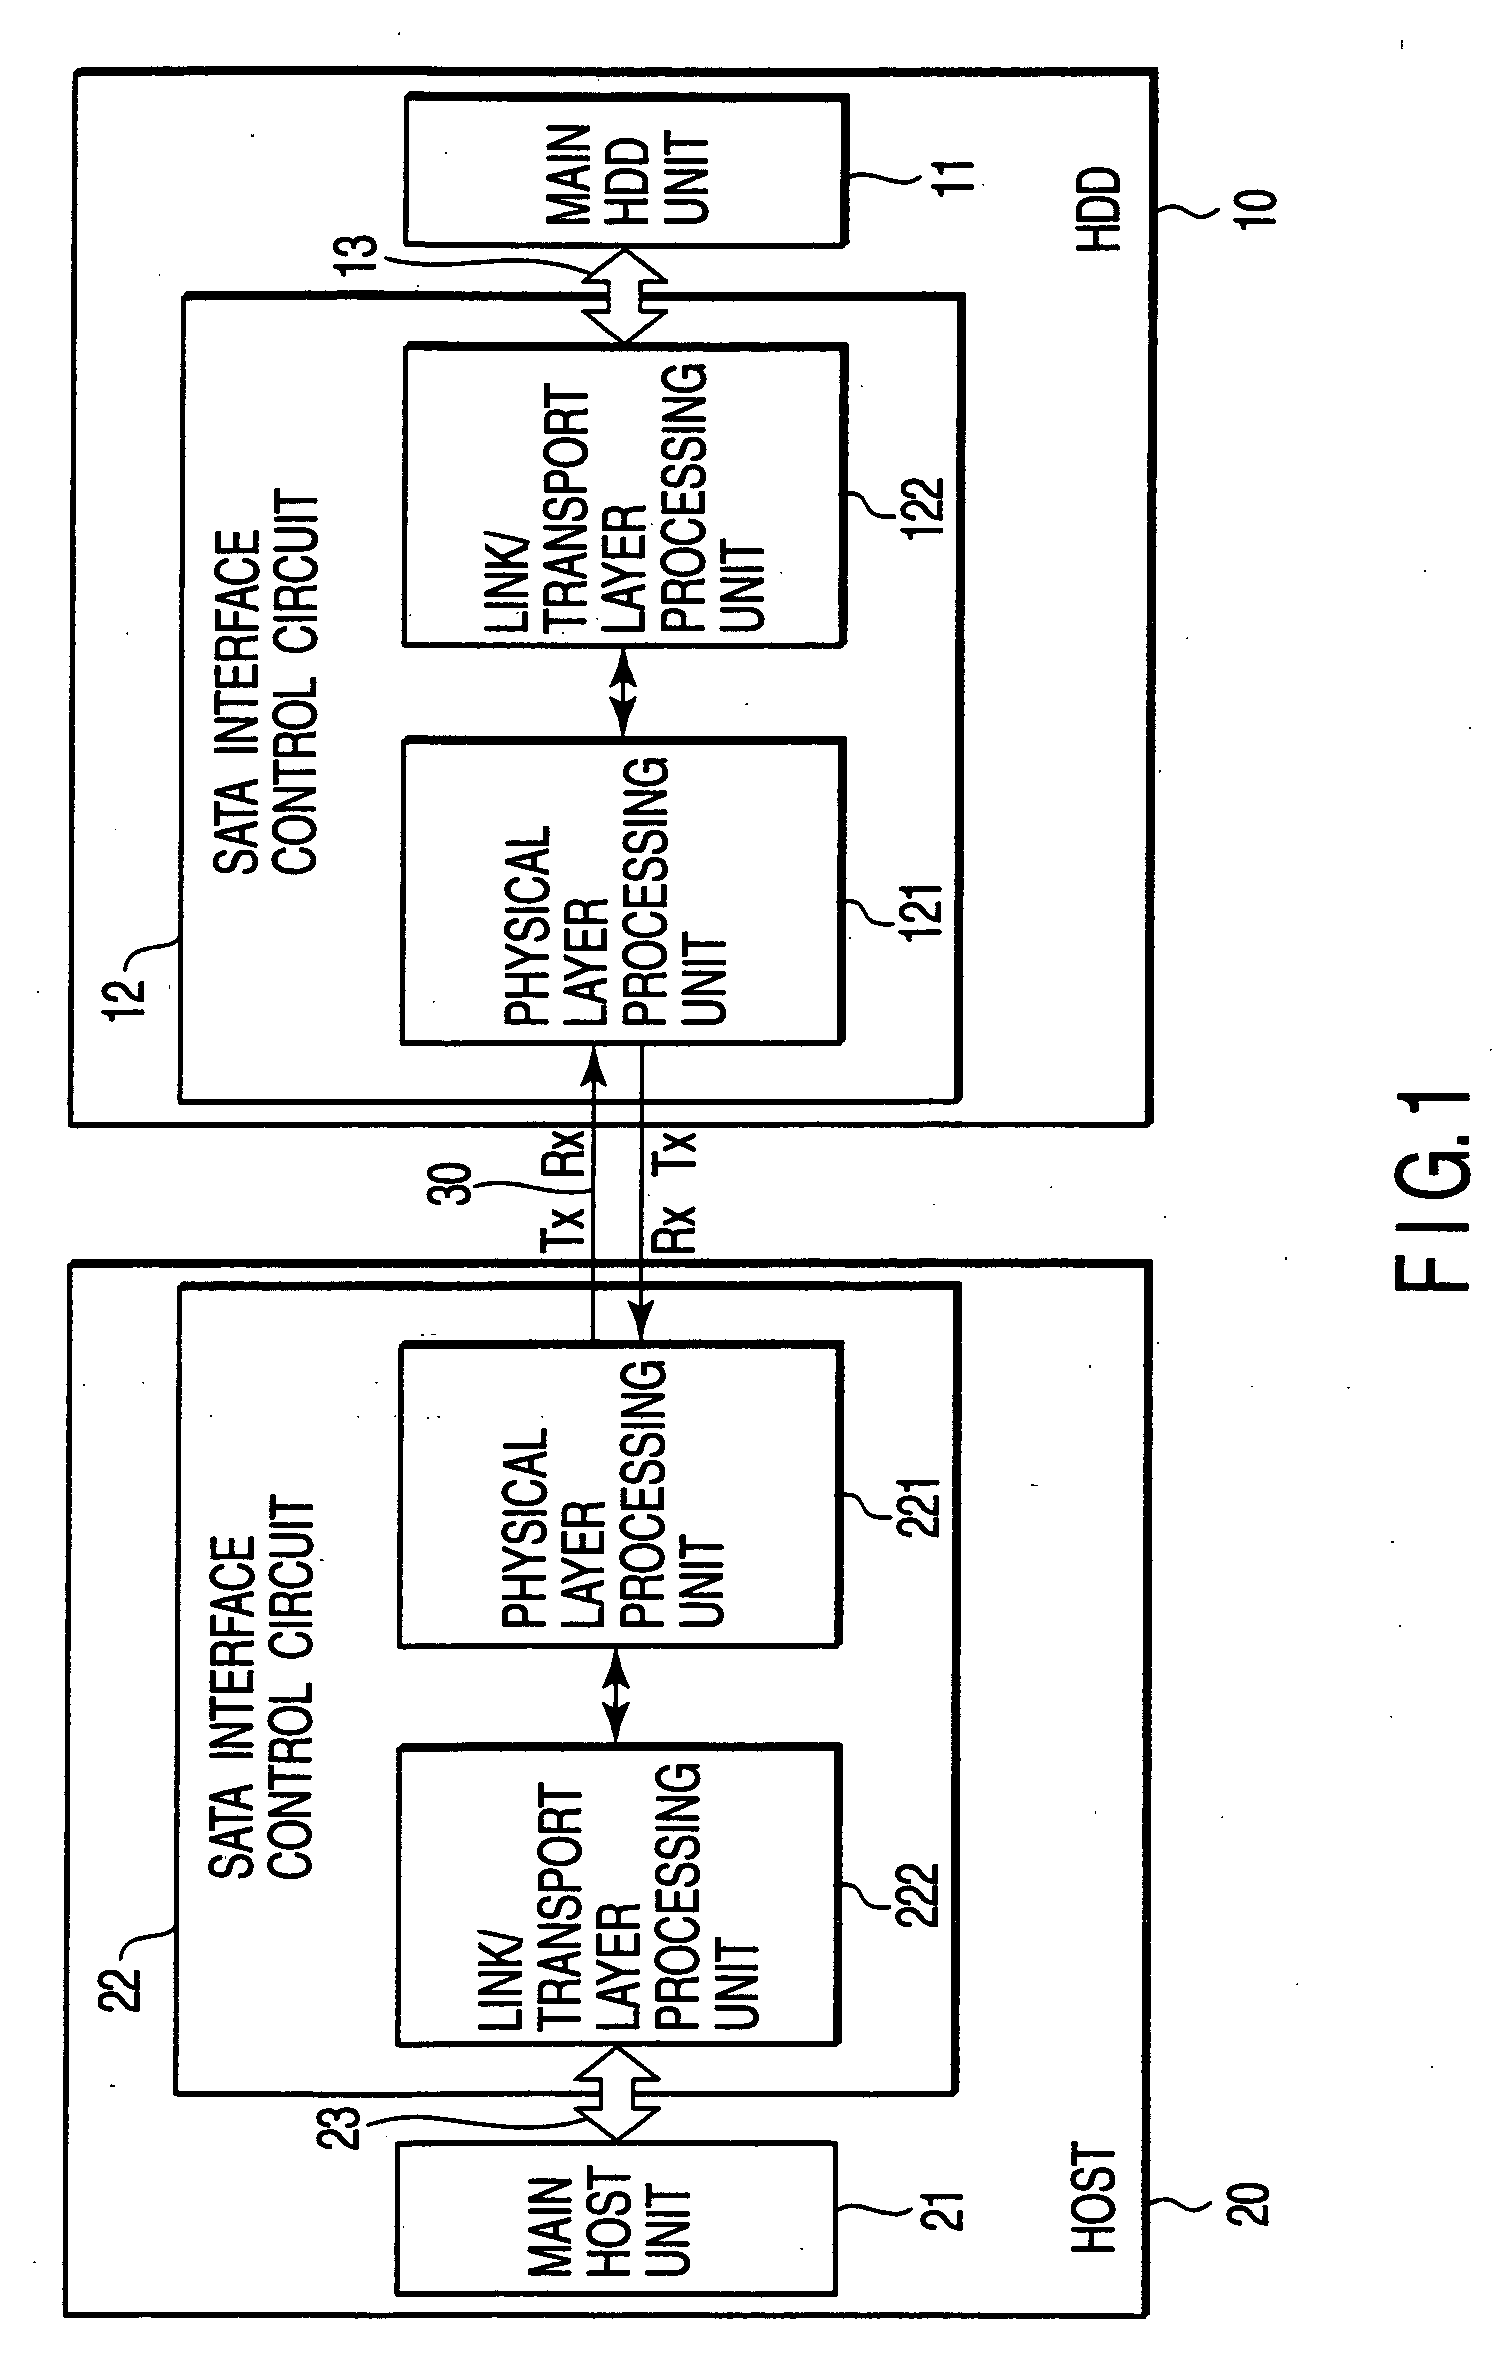 Electronic device with serial ATA interface and power saving method for serial ATA buses